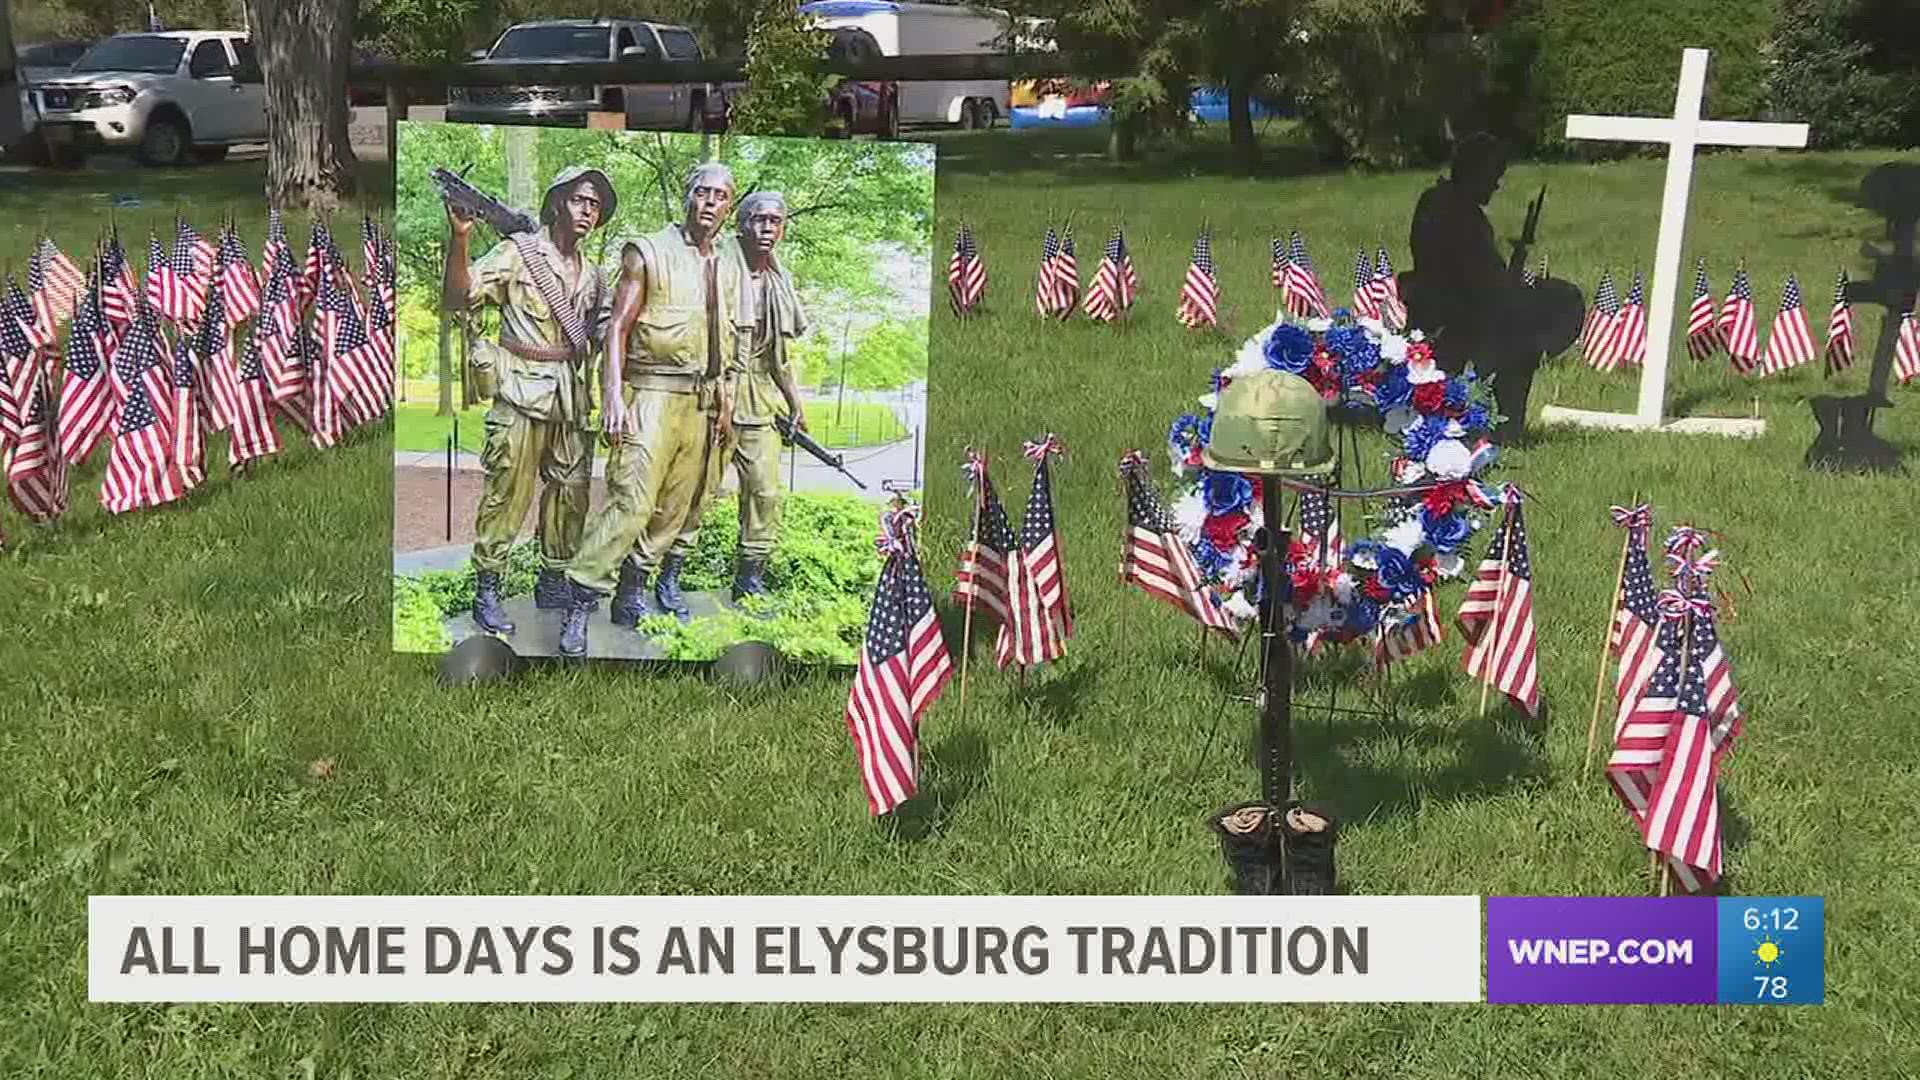 When many people have the day off from work, some people in the Elysburg area came to an event that honors our veterans.